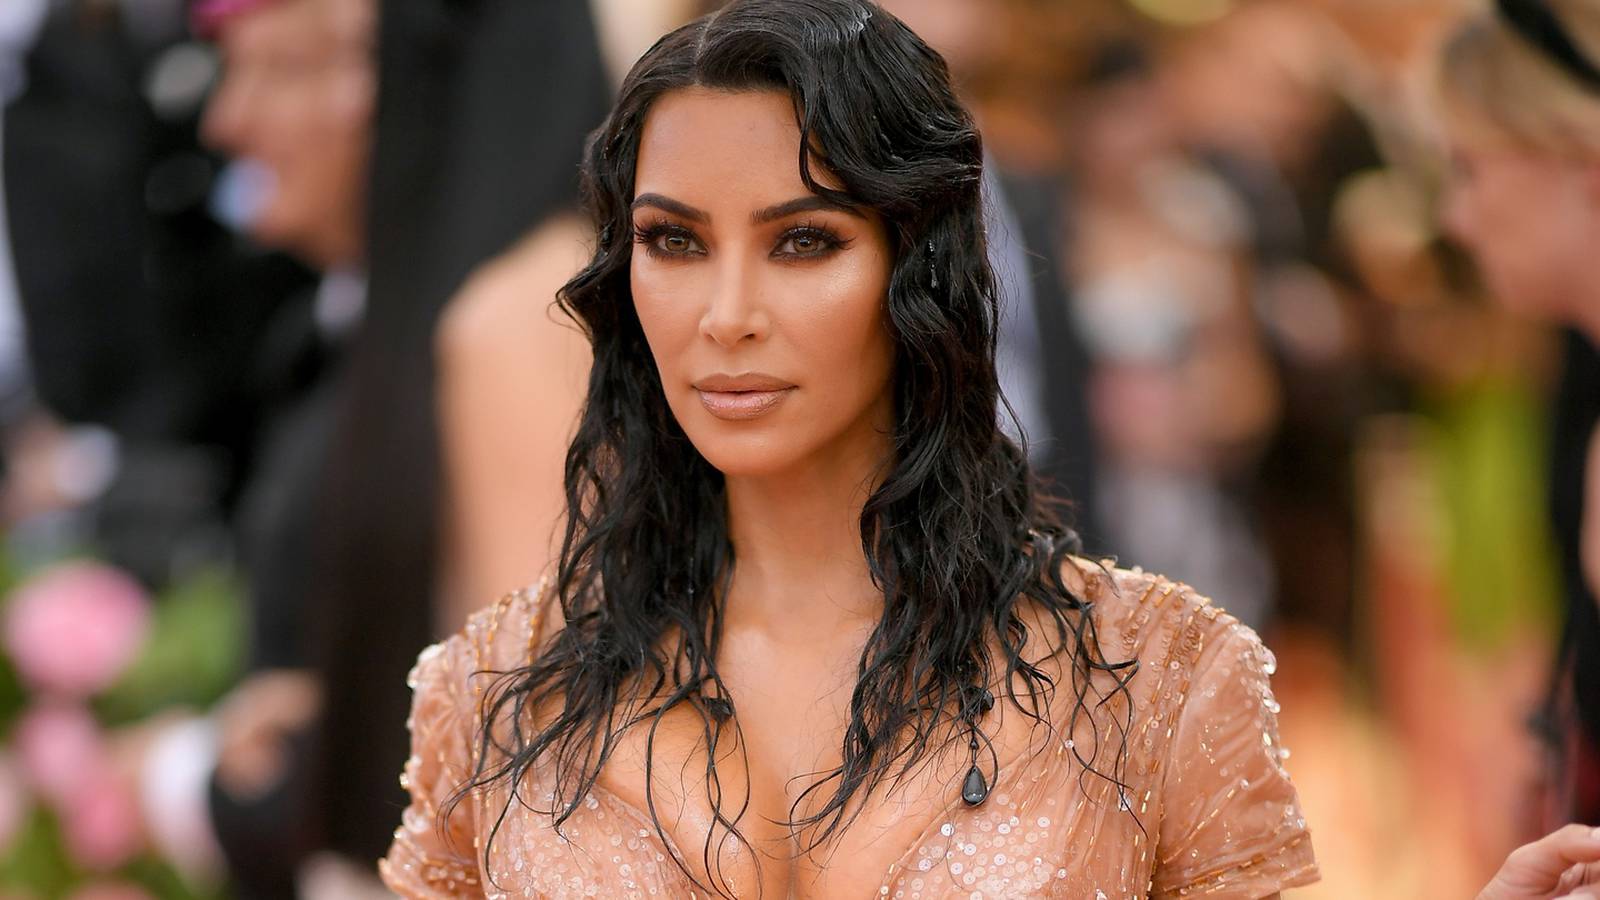 Kim Kardashian West at 40: How the queen of social media changed the world  – The Irish Times